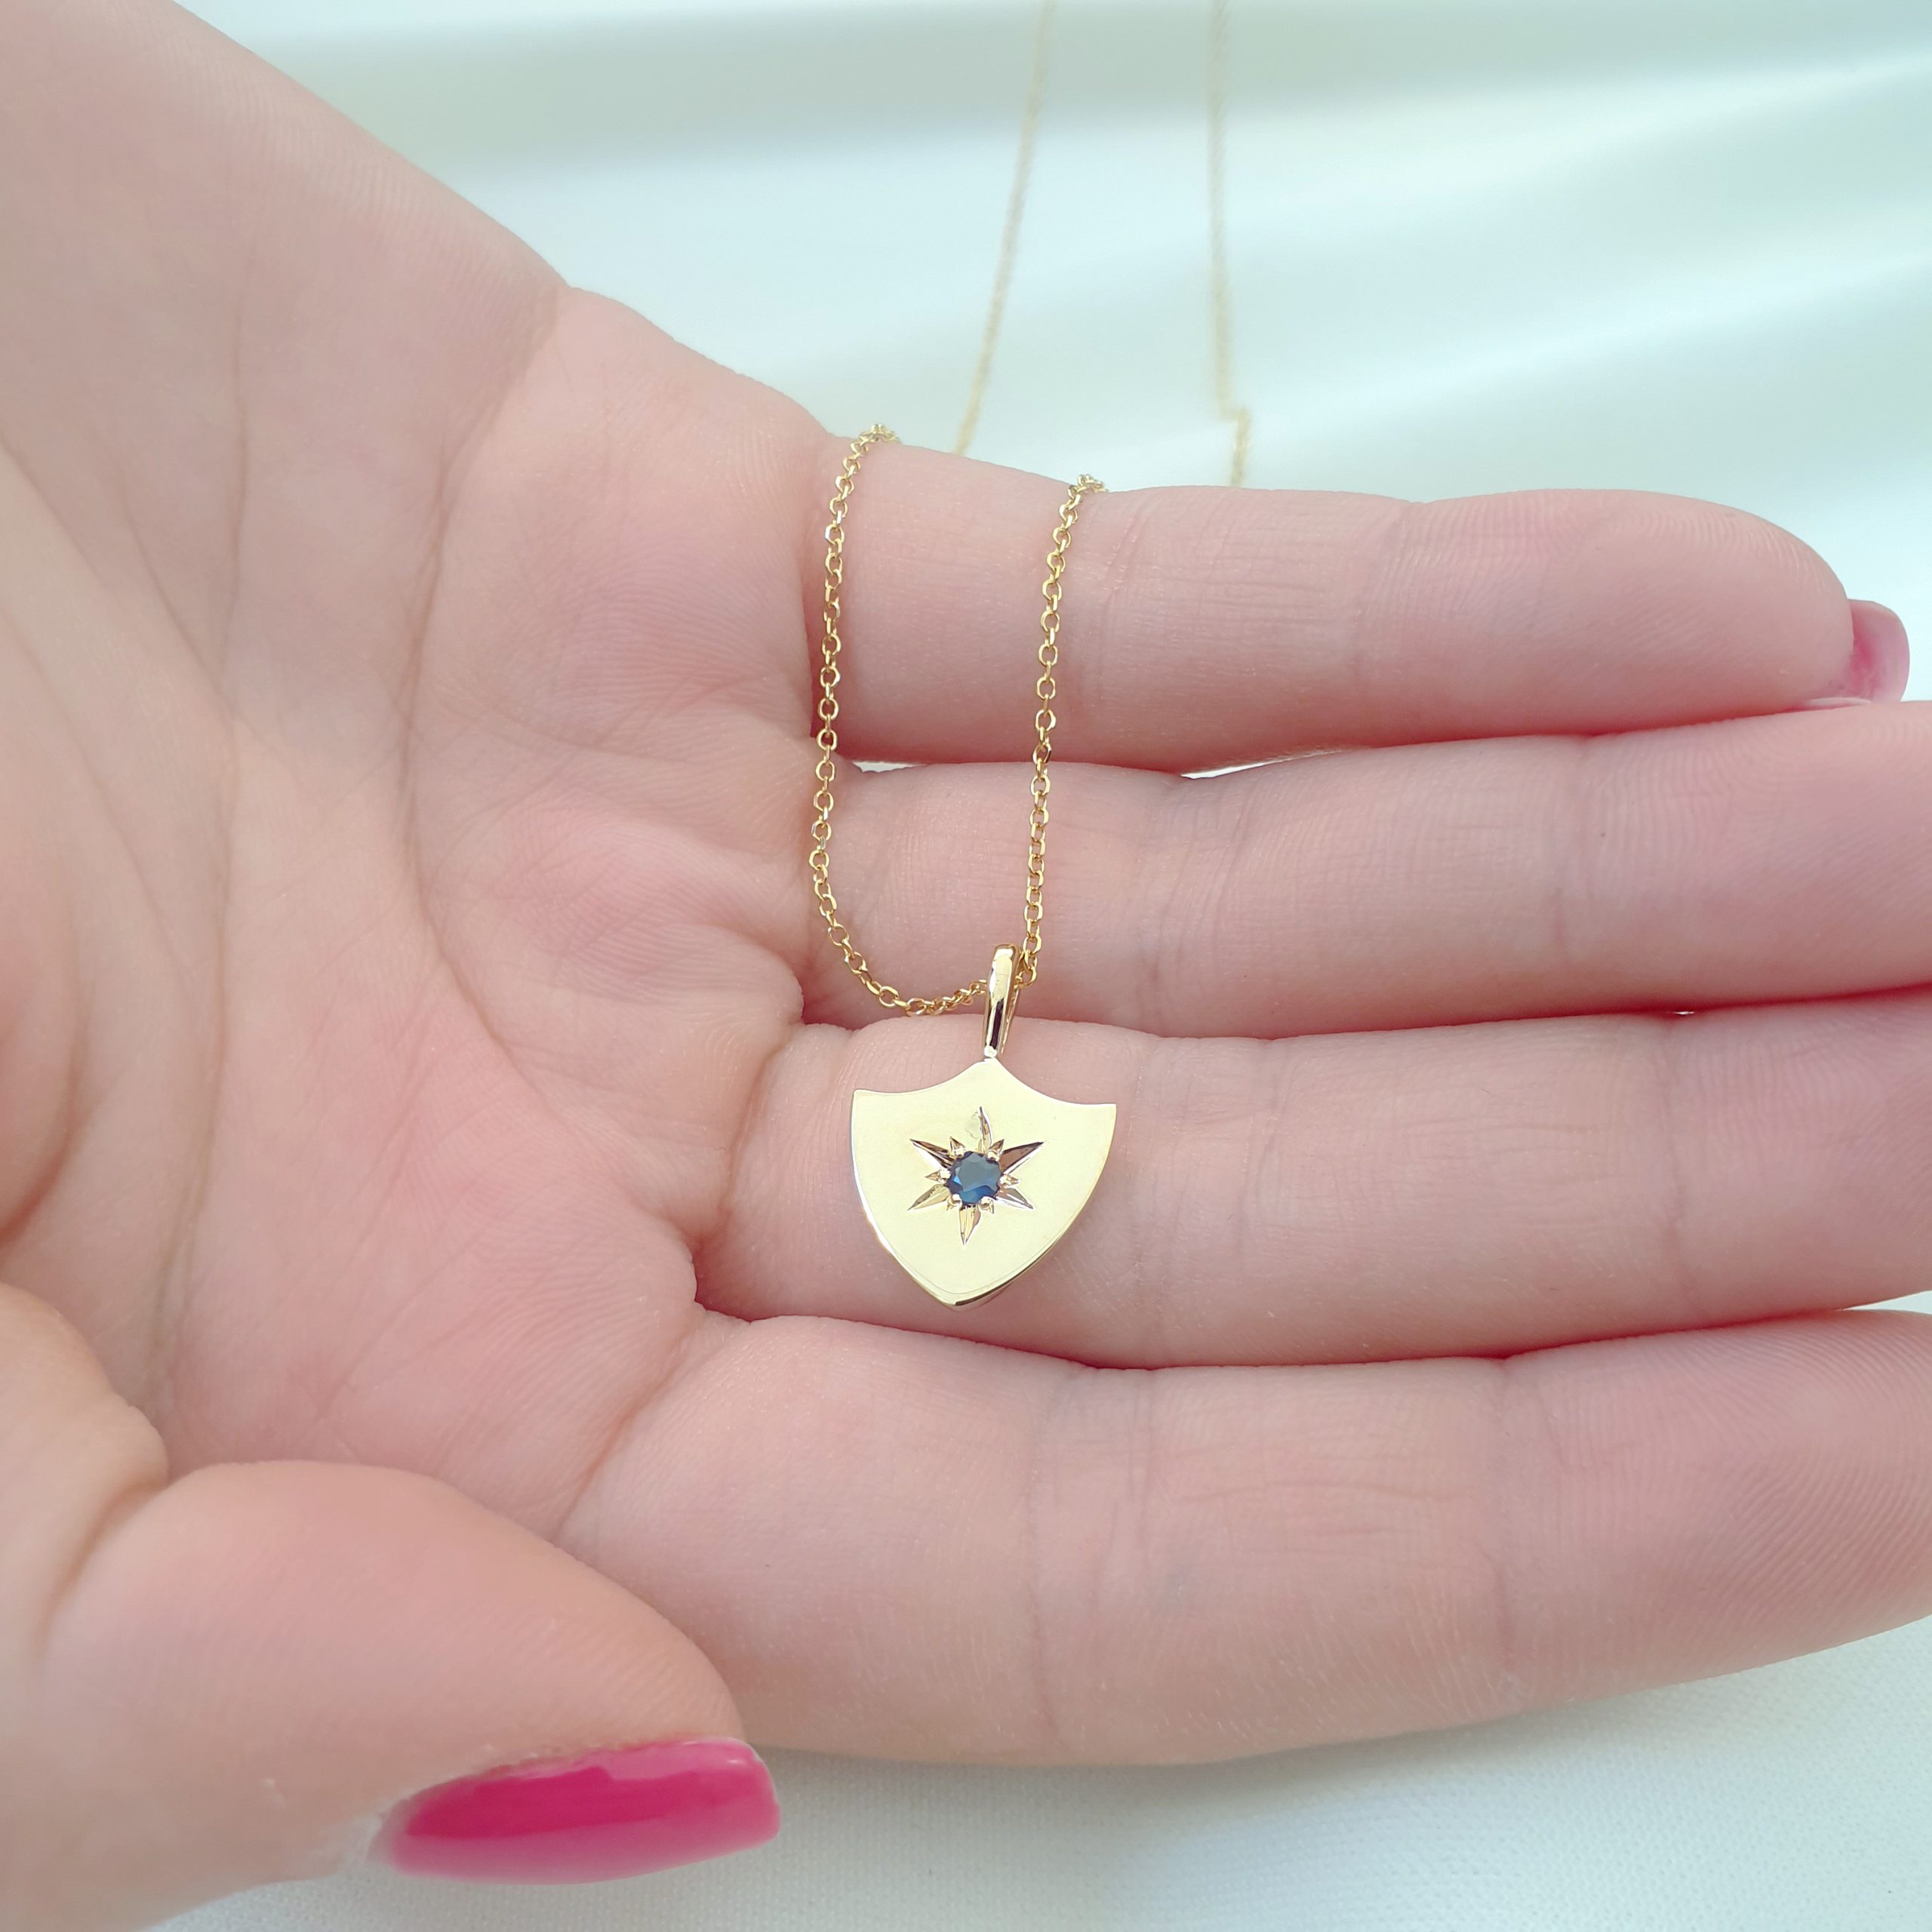 Gold Engraved Shield Necklace